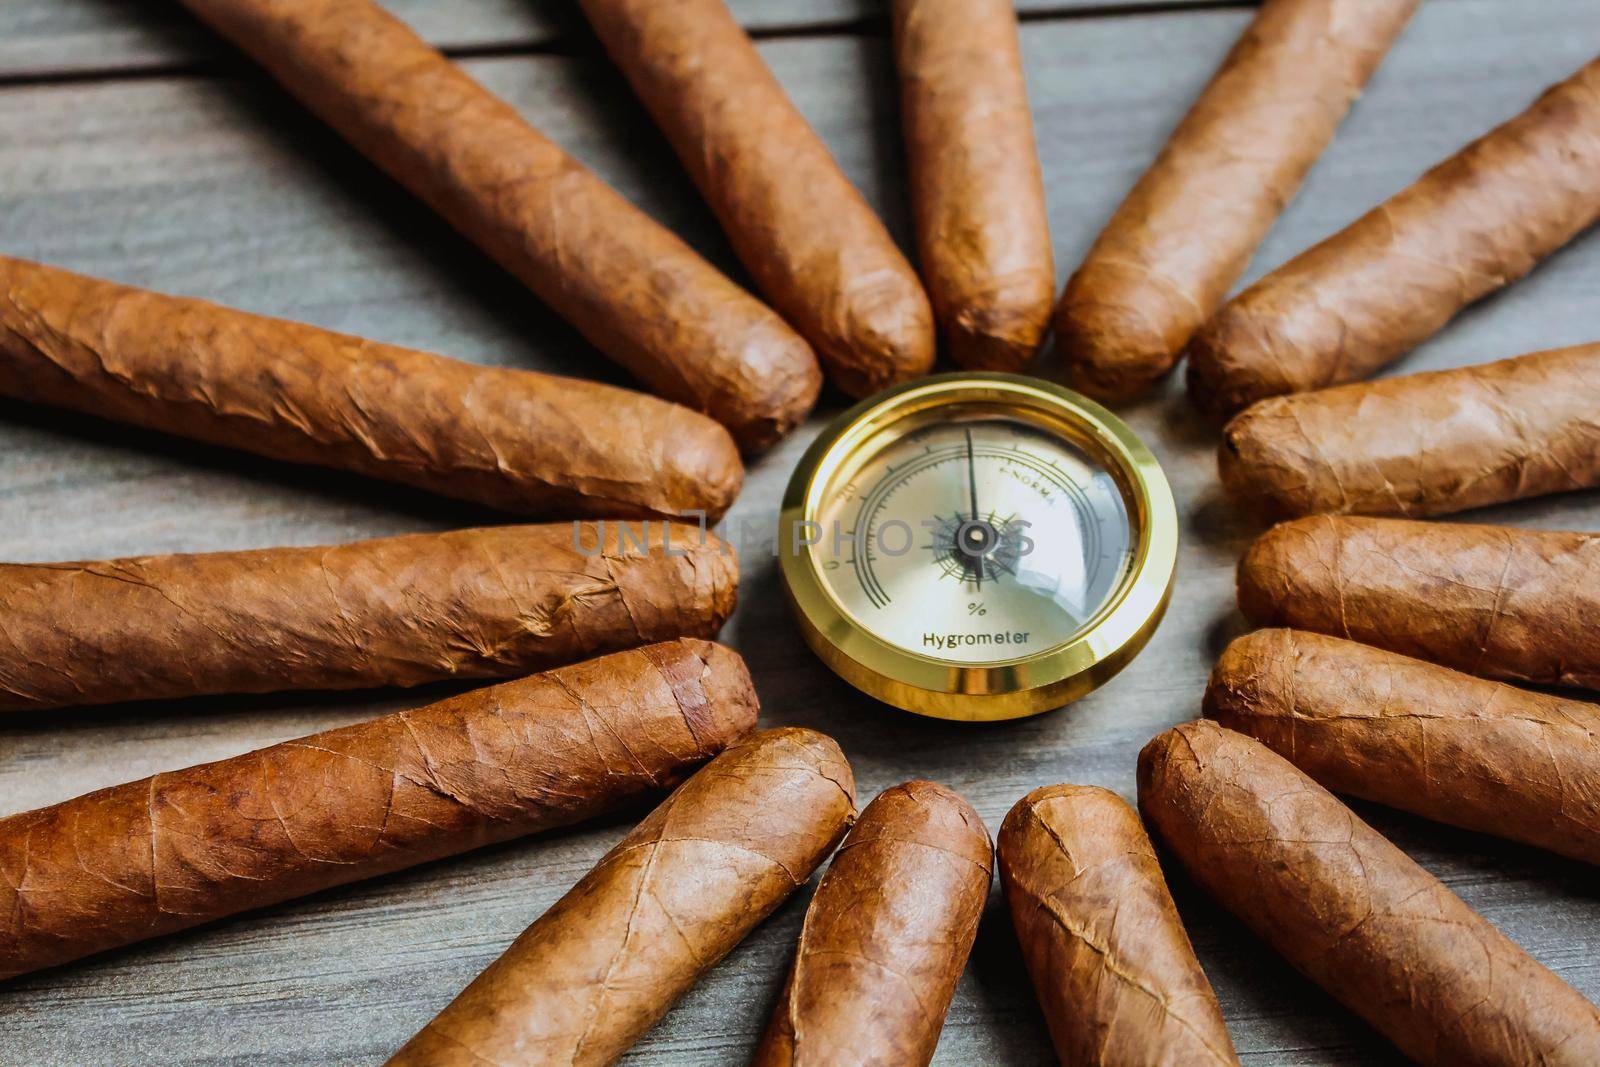 Cigars with humidor hygrometer on the wooden background by JuliaDorian